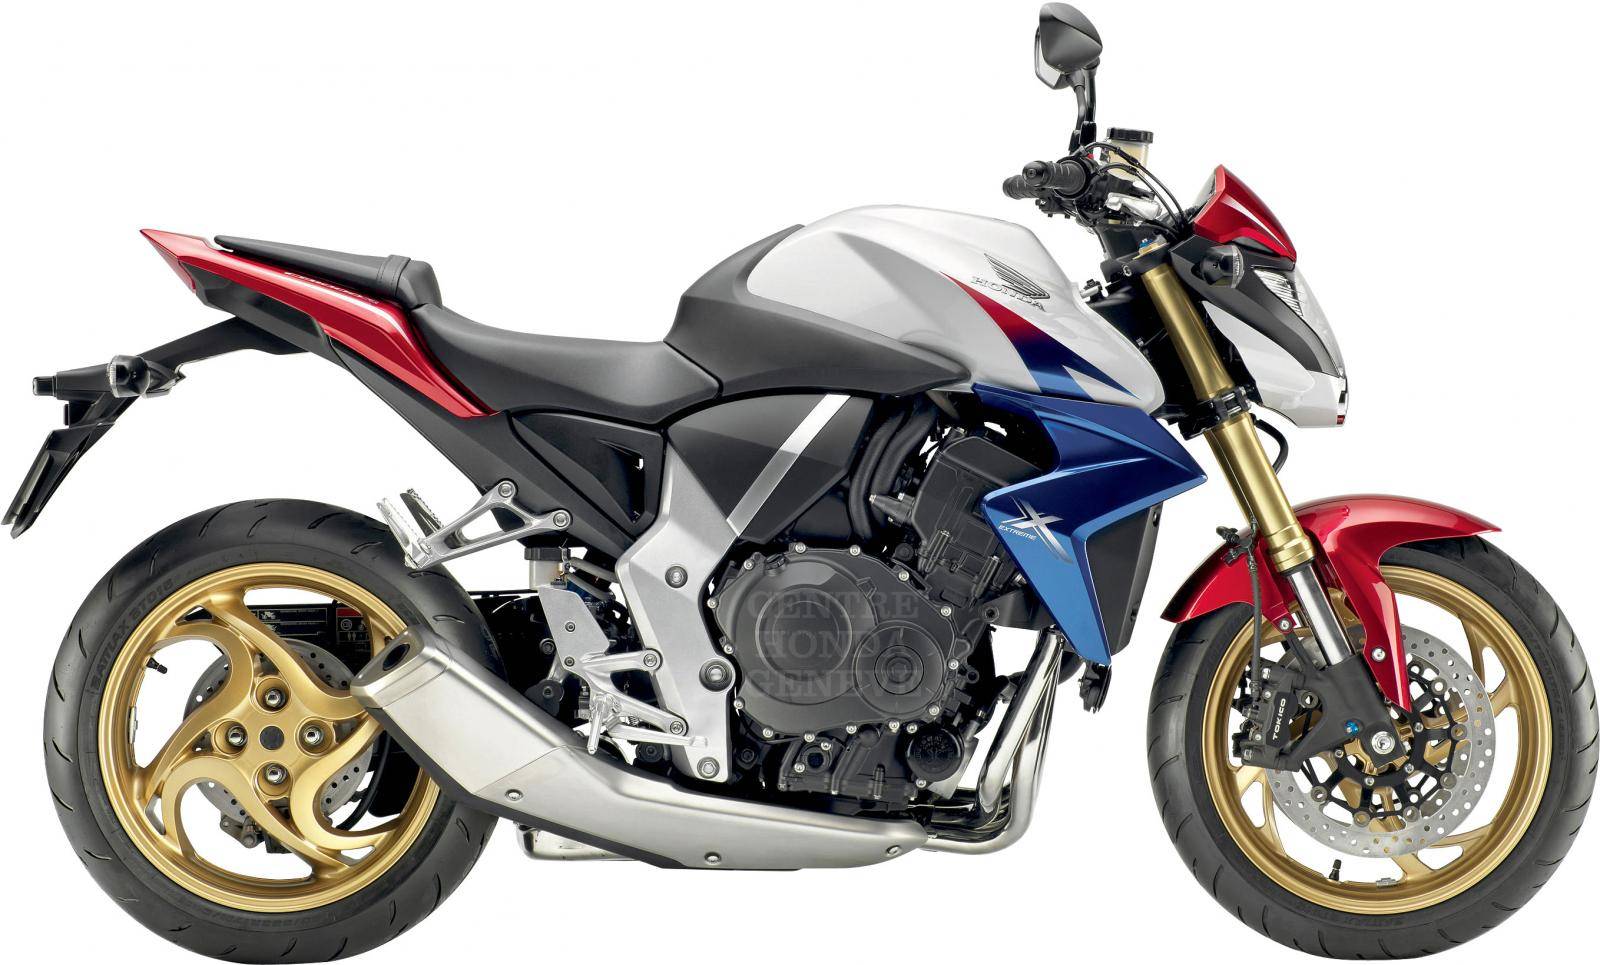 2018 honda cb1000r review (15 fast facts)